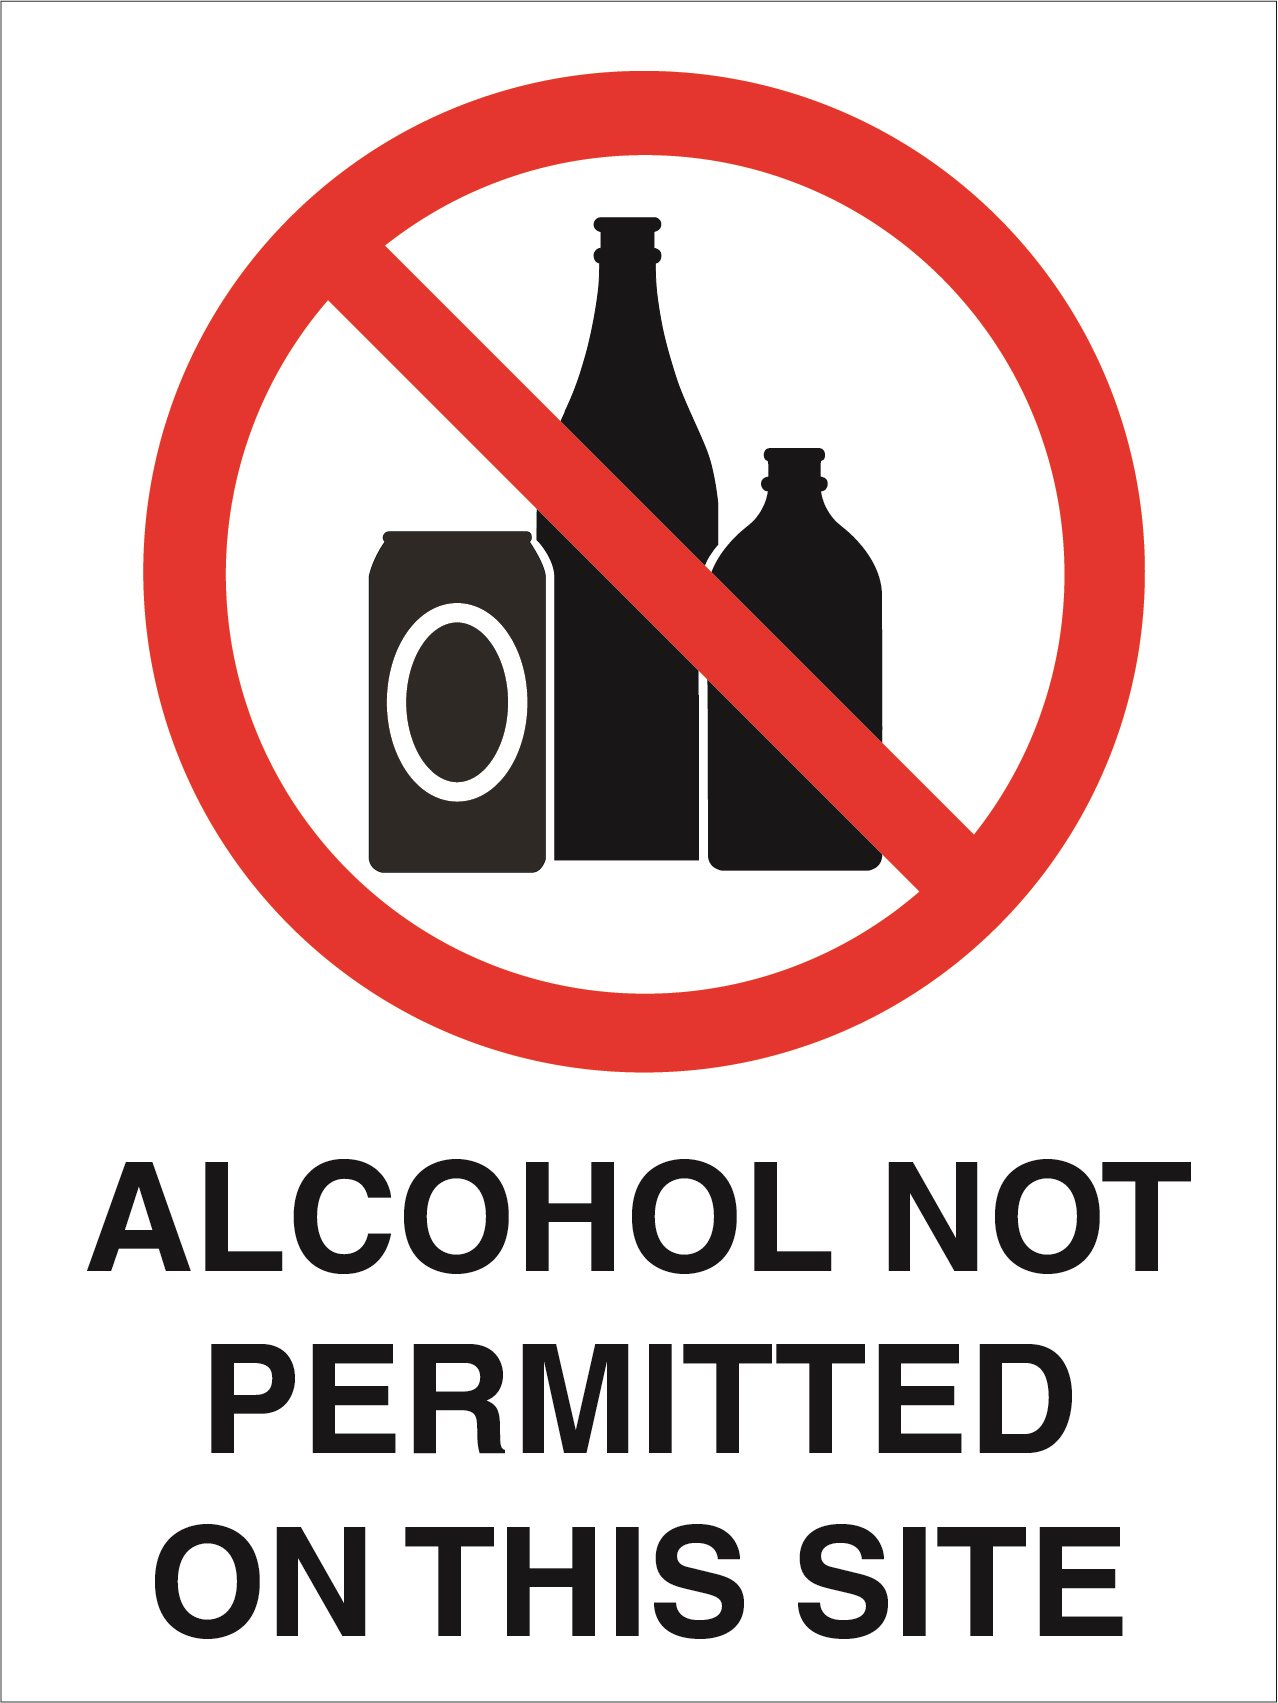 Prohibition - Alcohol Not Permitted on this Site